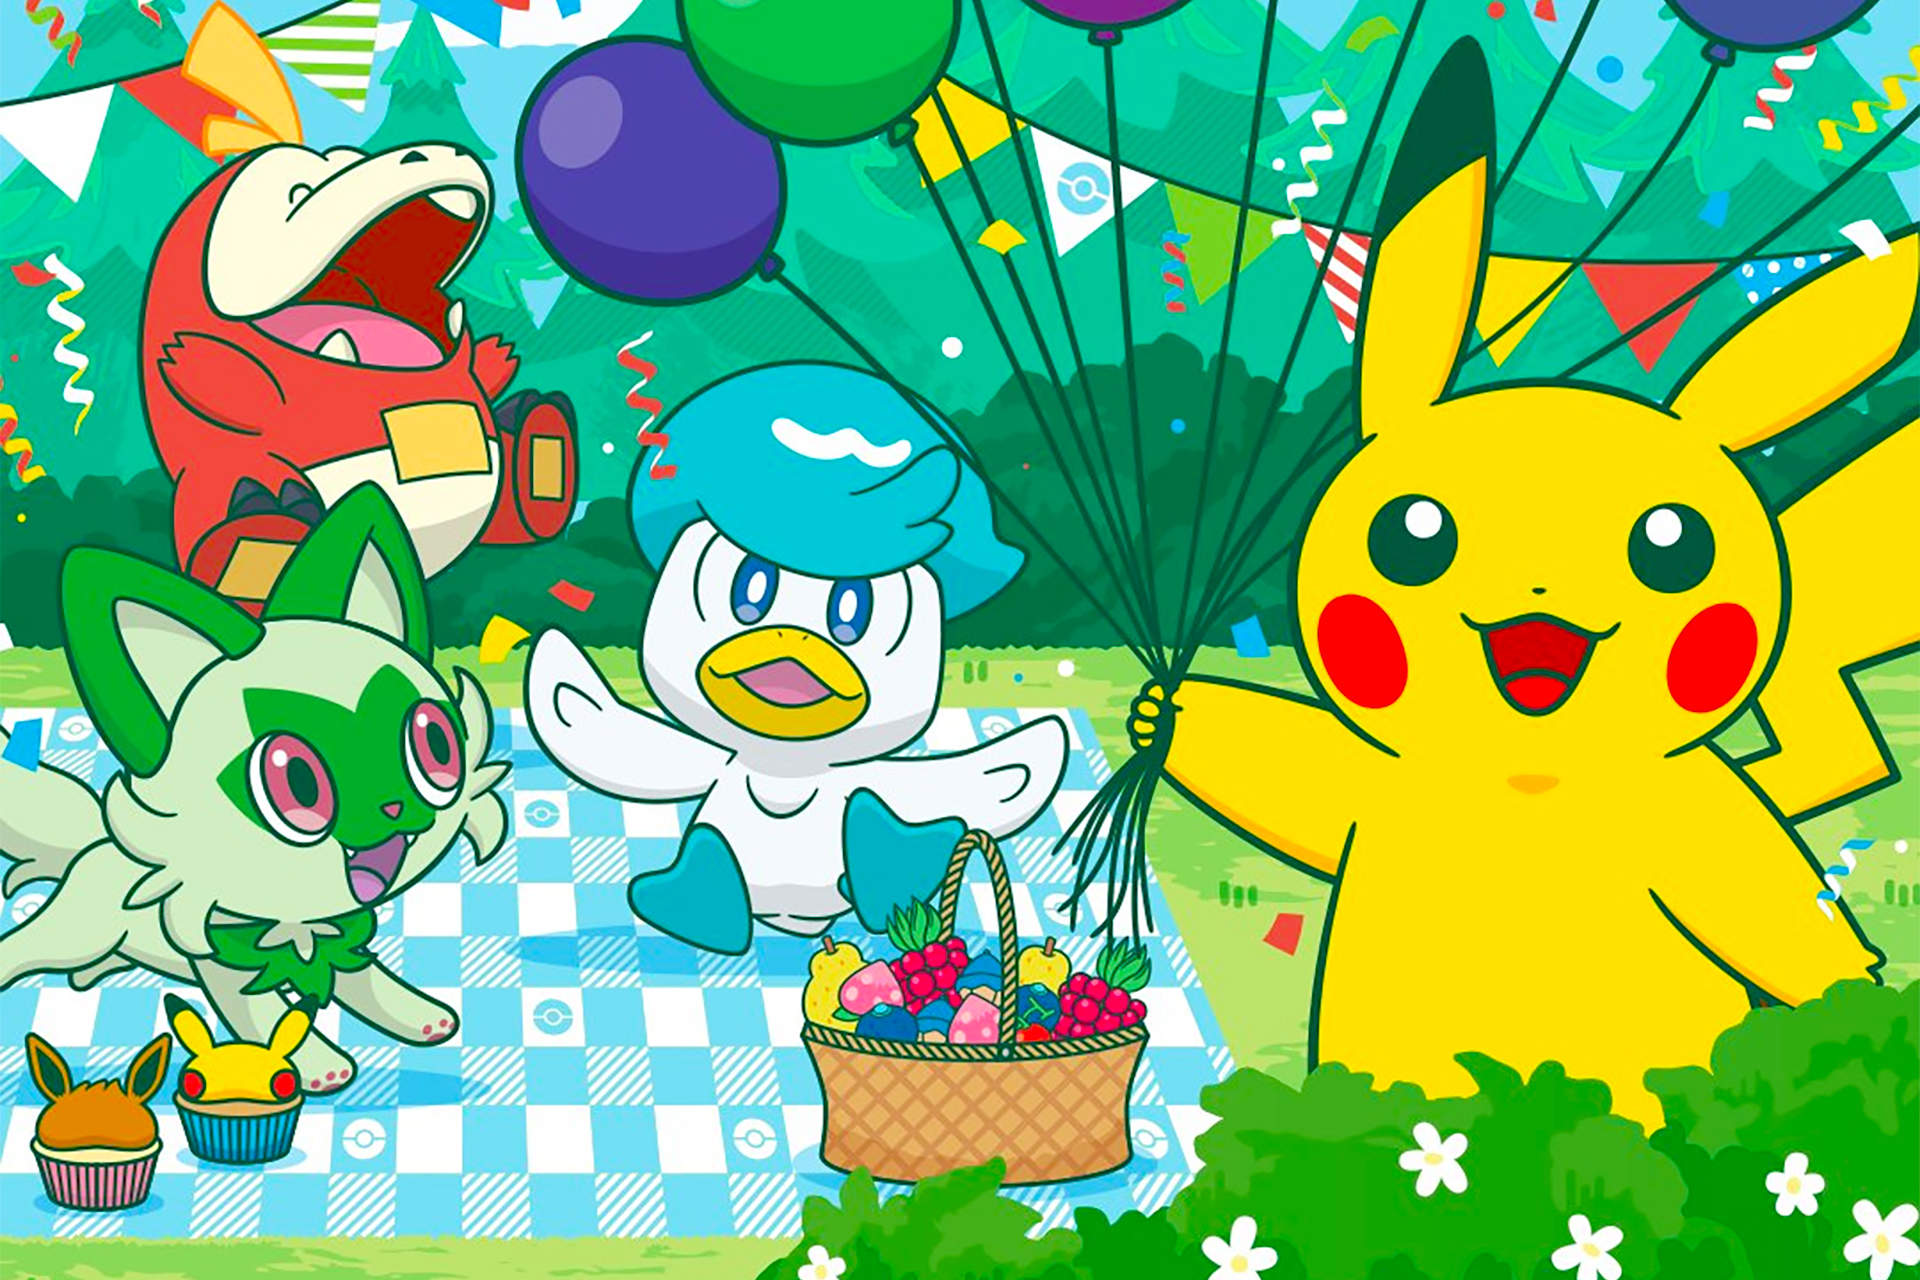 Pikachu holds balloons while Quaxly, Sprigatito, and Fuecoco frolick on a nearby picnic blanket in an illustration for Pokémon Day 2023